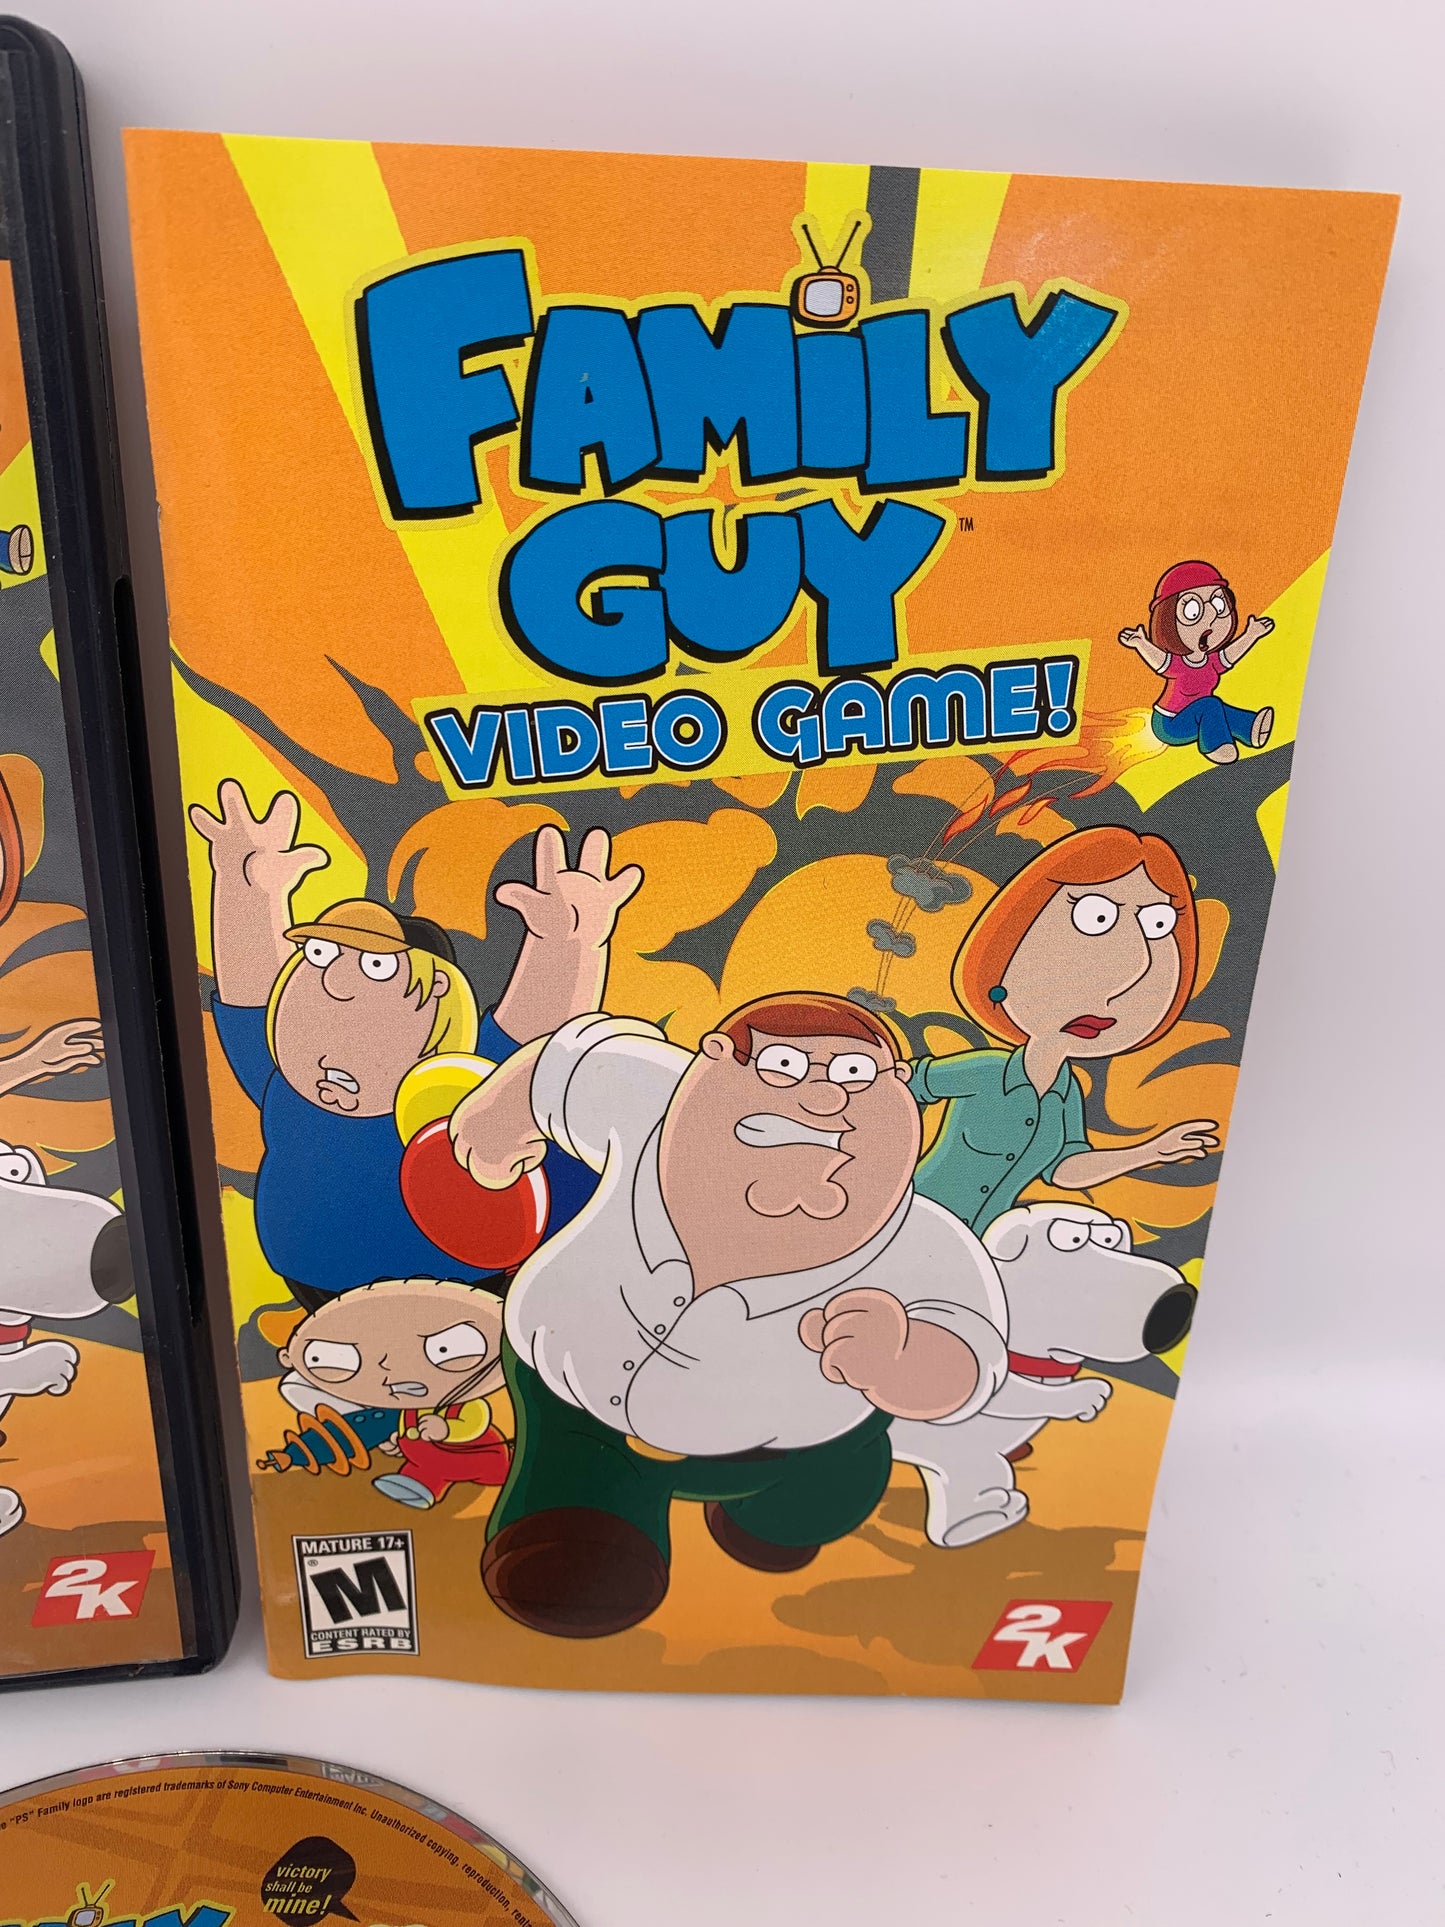 SONY PLAYSTATiON 2 [PS2] | FAMiLY GUY ViDEO GAME